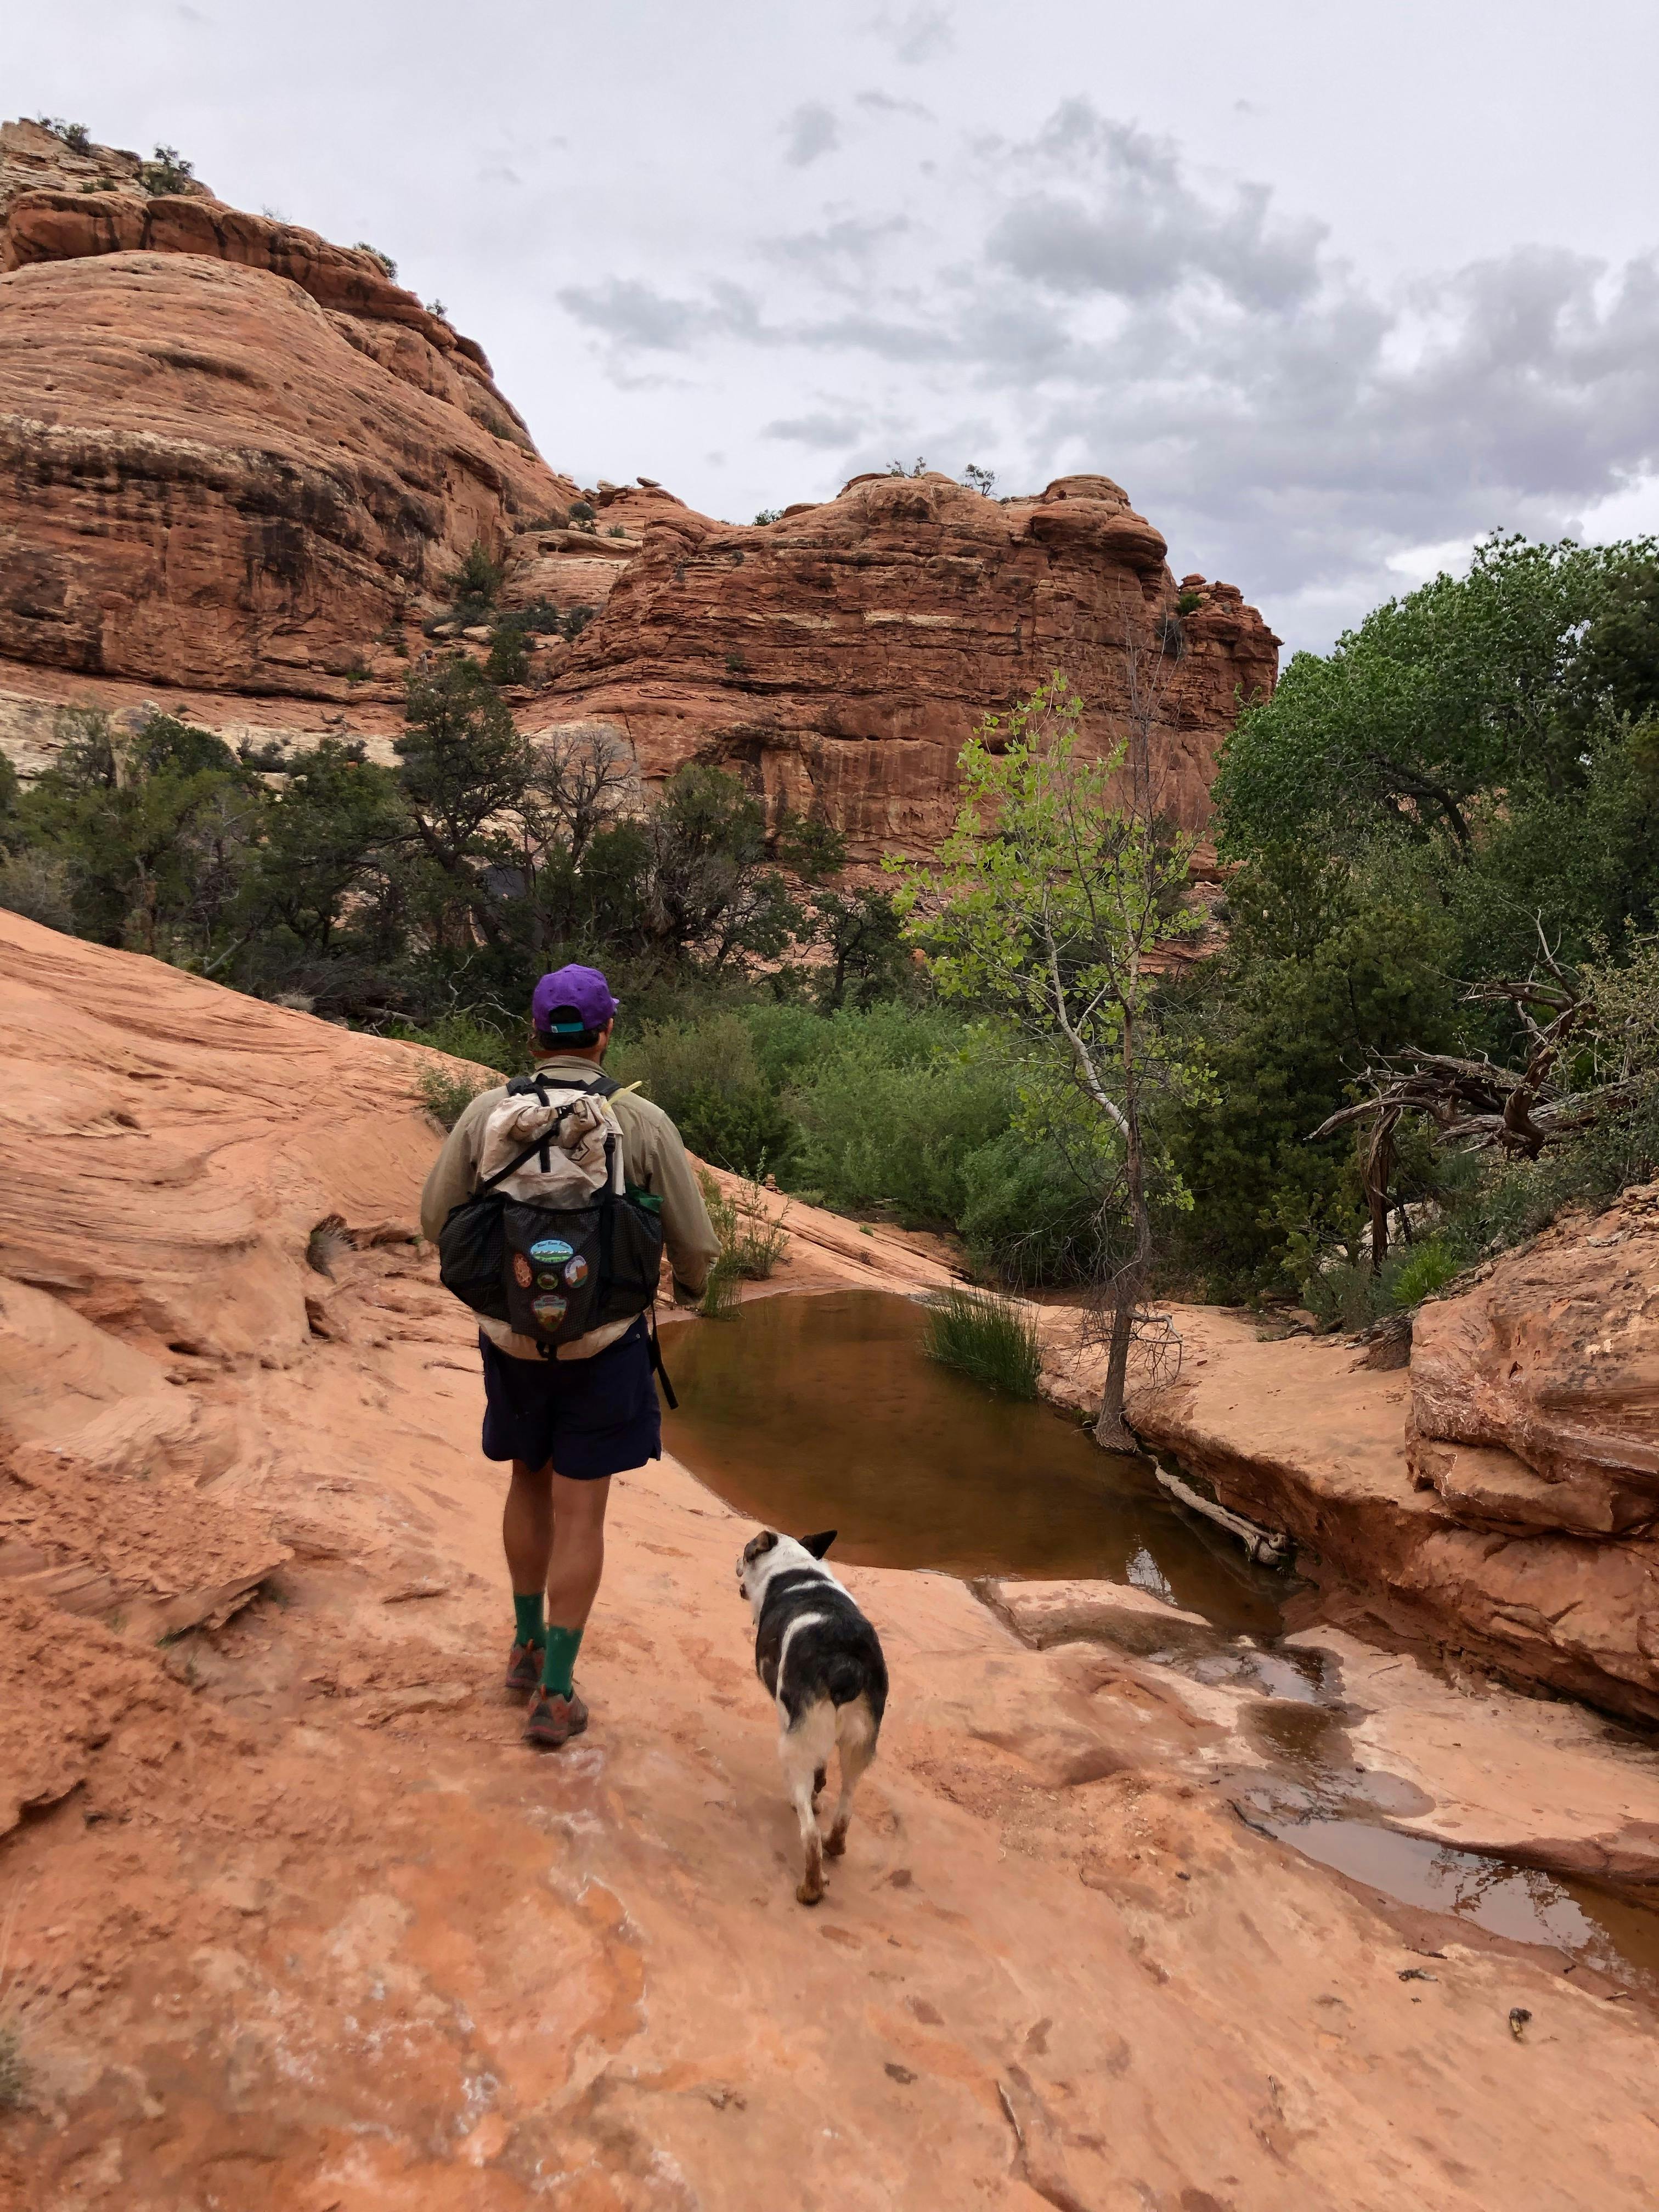 A hiker in his dog walking through the desert wearing Oboz hiking shoes